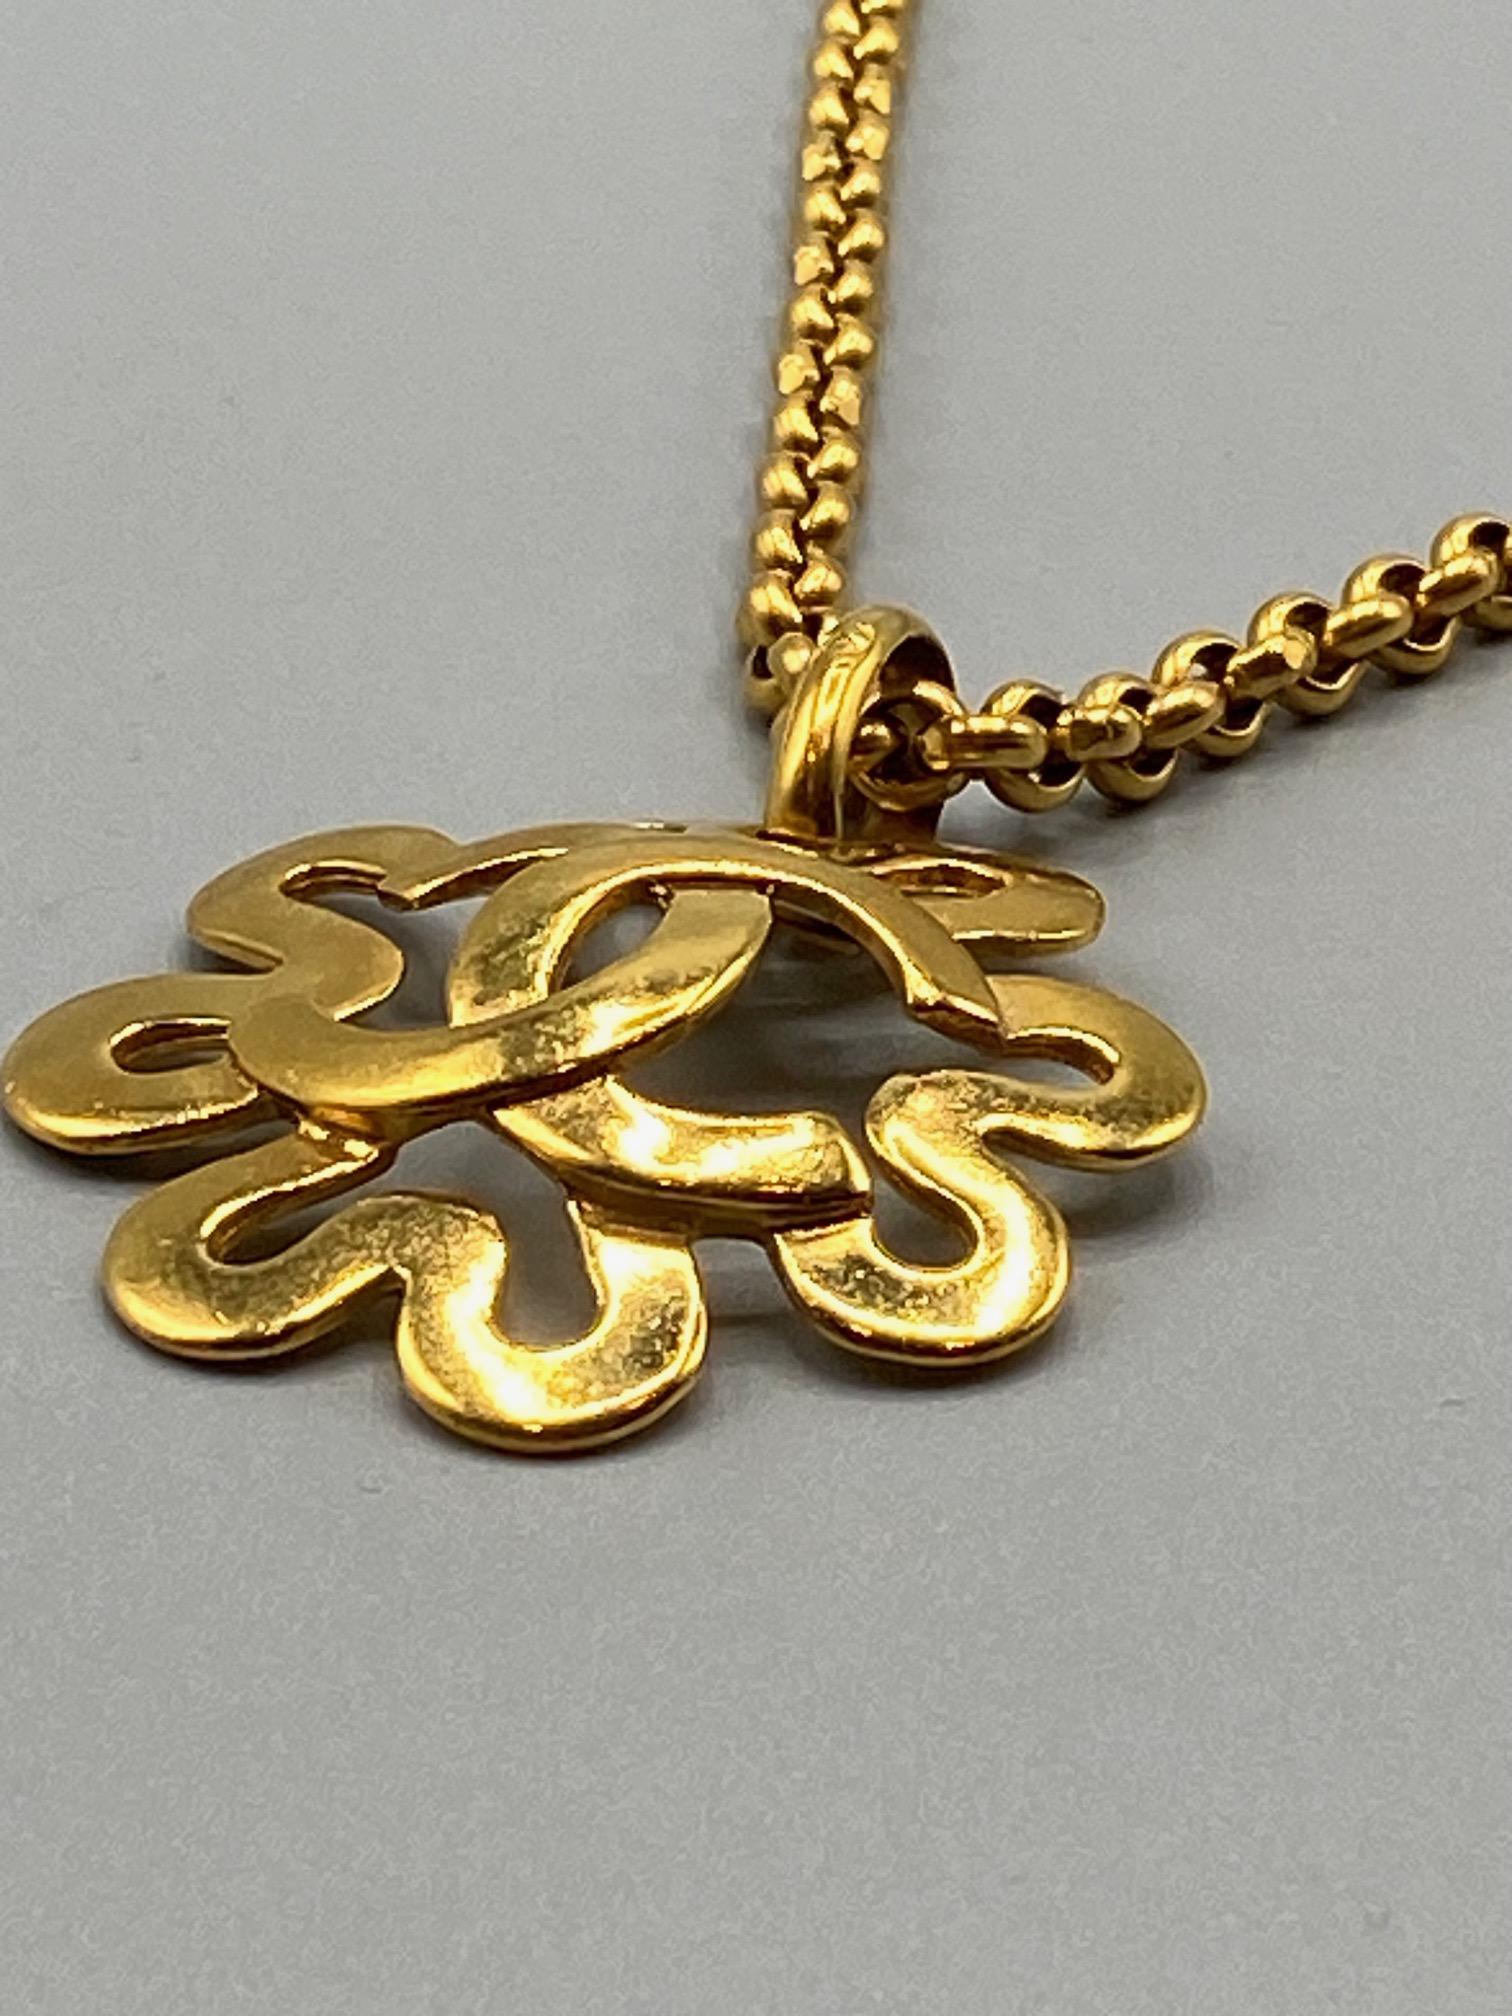 Women's or Men's Chanel Flower Pendant Necklace from Spring 1995 Collection